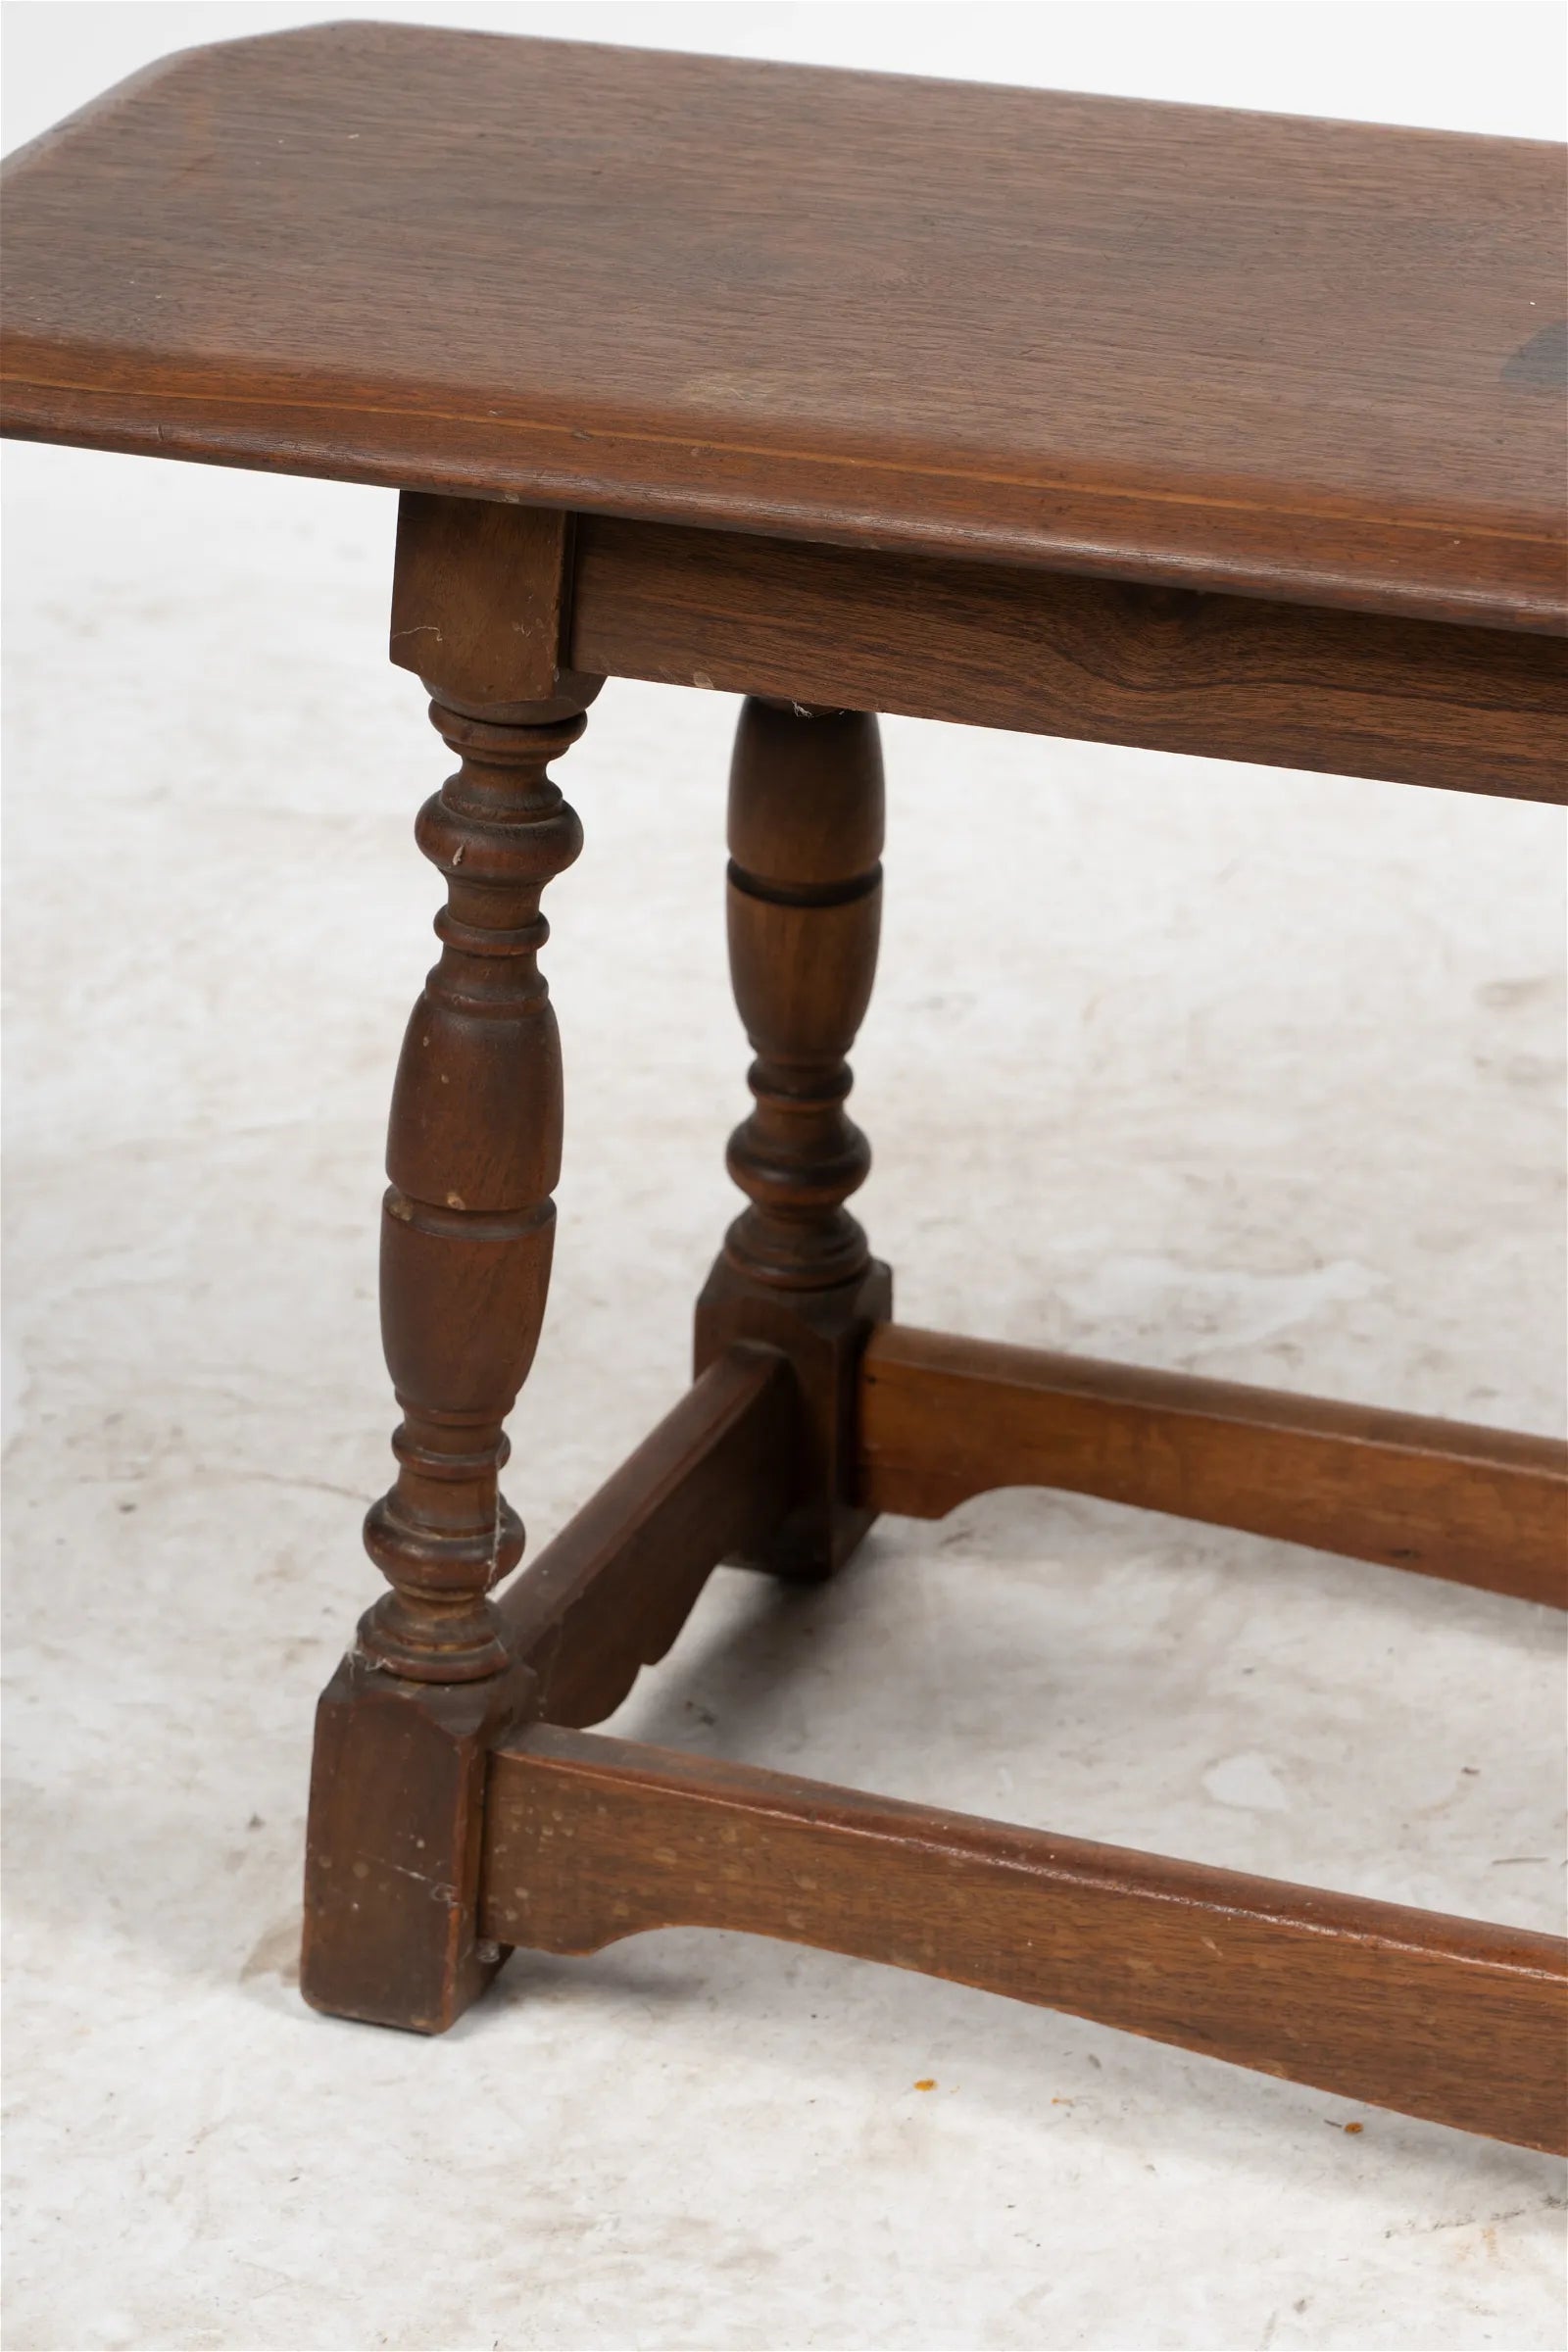 AF2-419: Antique Early 20th Century American Walnut Colonial Style Bench with Turned Legs